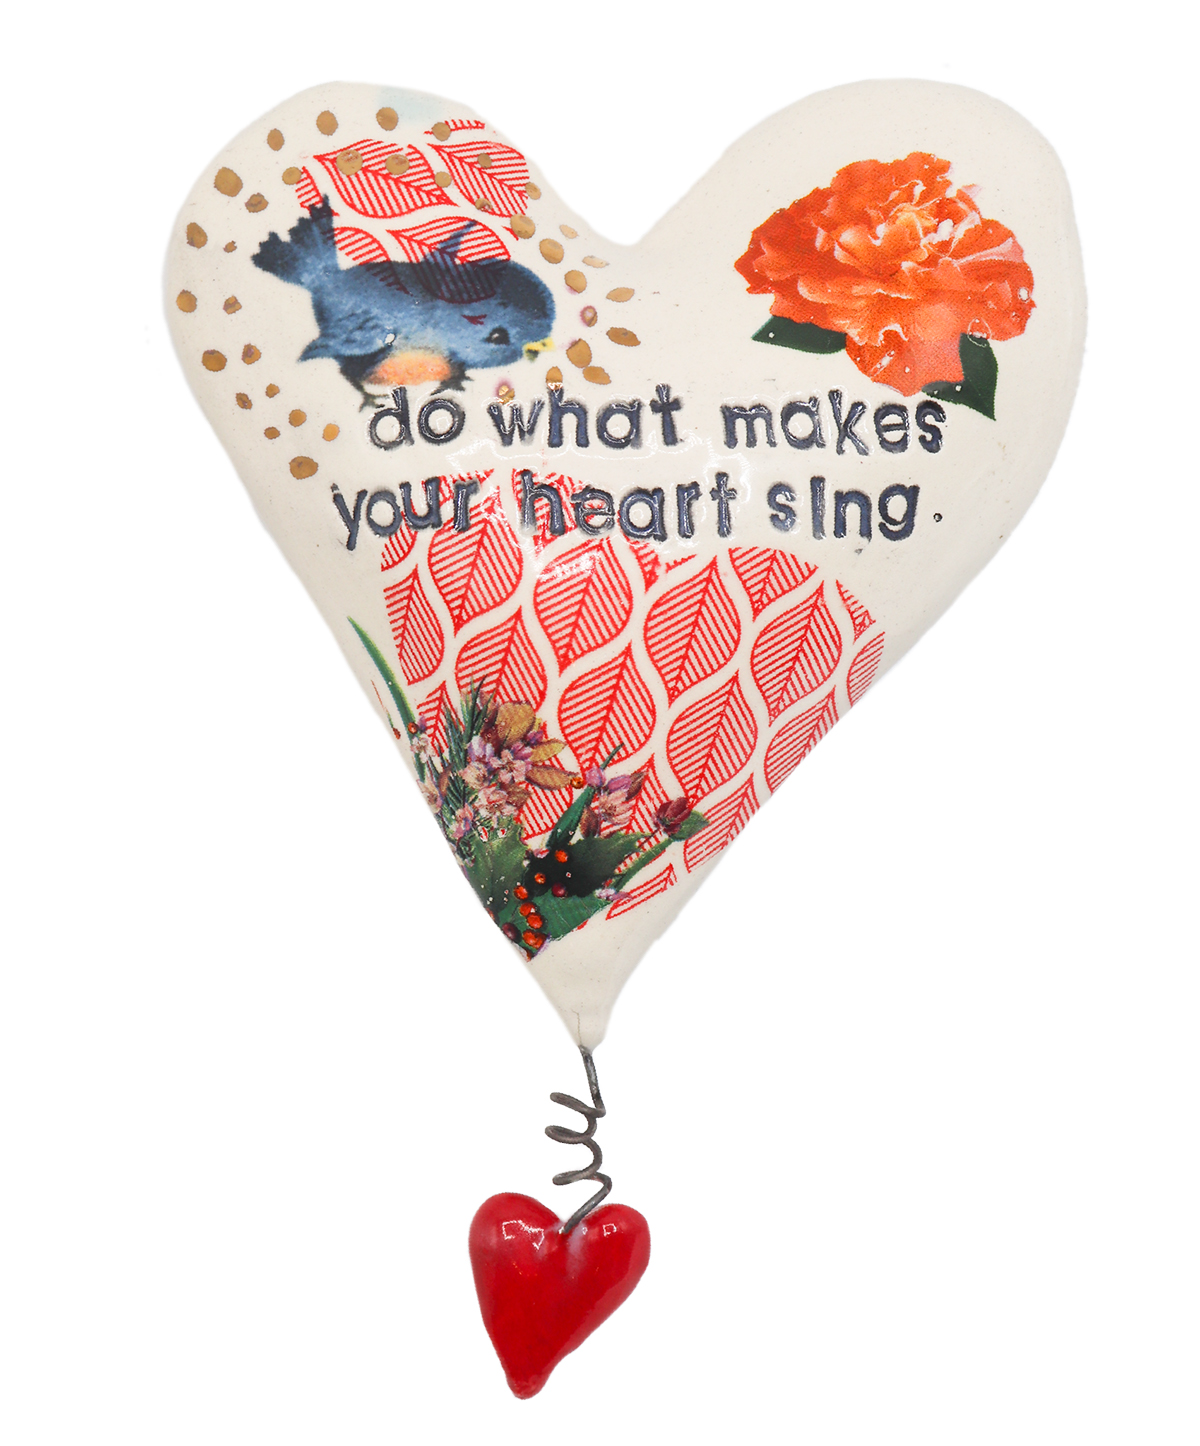 MARIA COUNTS - "DO WHAT MAKES YOUR HEART SING" HEART - CERAMIC - 4.5 x 6.5 x 1.25